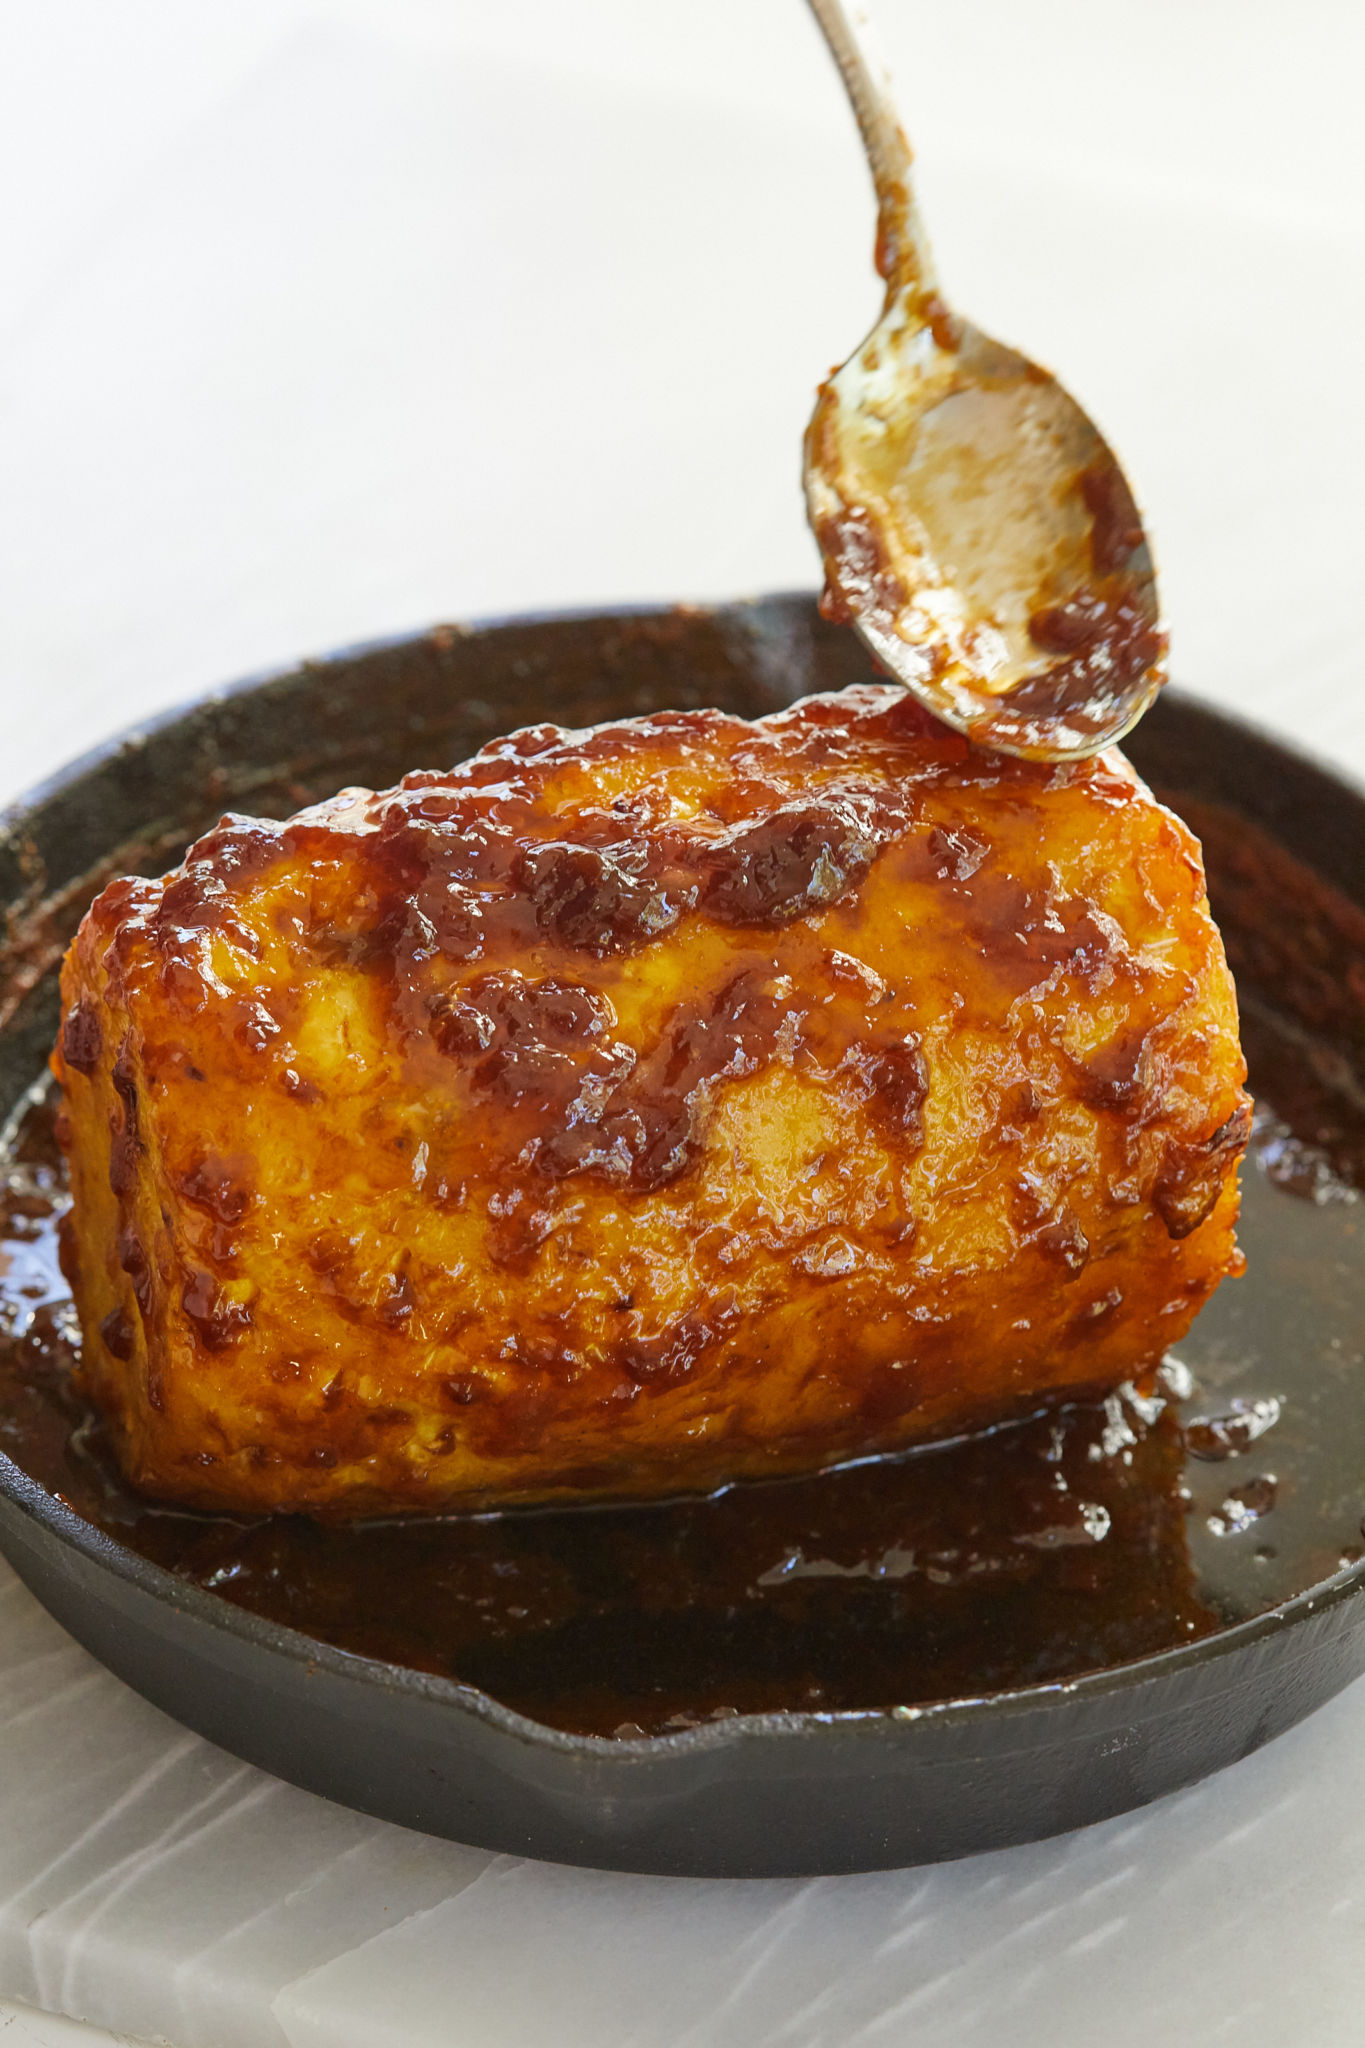 Drizzling butter, rum, and brown sugar on a roasted pineapple